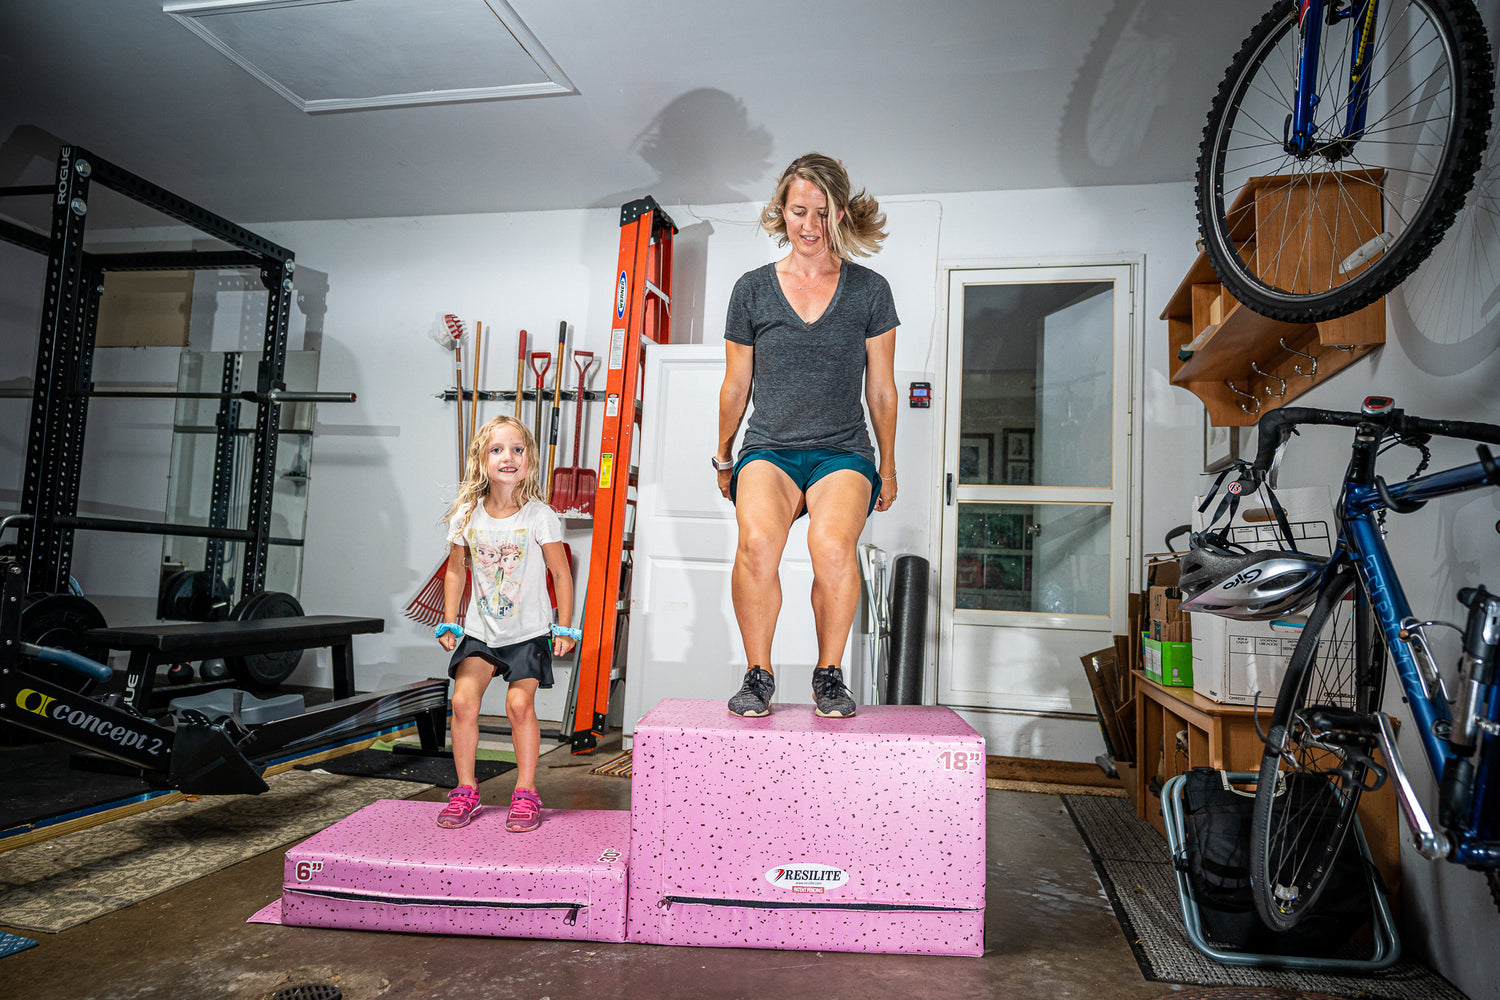 HOW TO CREATE A HOME GYM - IT'S EASIER THAN YOU THINK